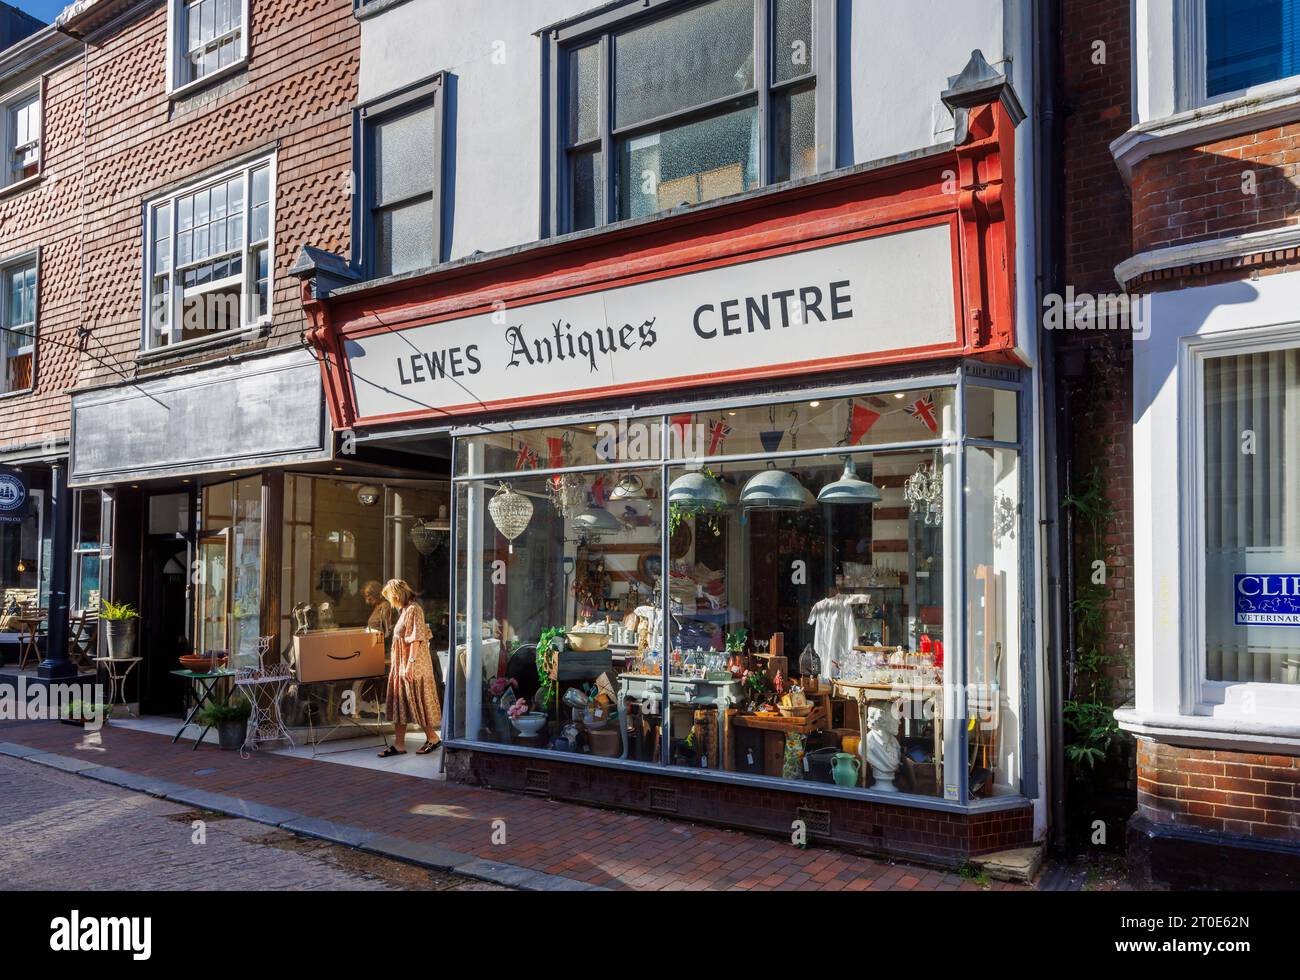 Lewes Antiques Centre in Cliffe High Street, Lewes, the historic county town of East Sussex, south-east England Stock Photo